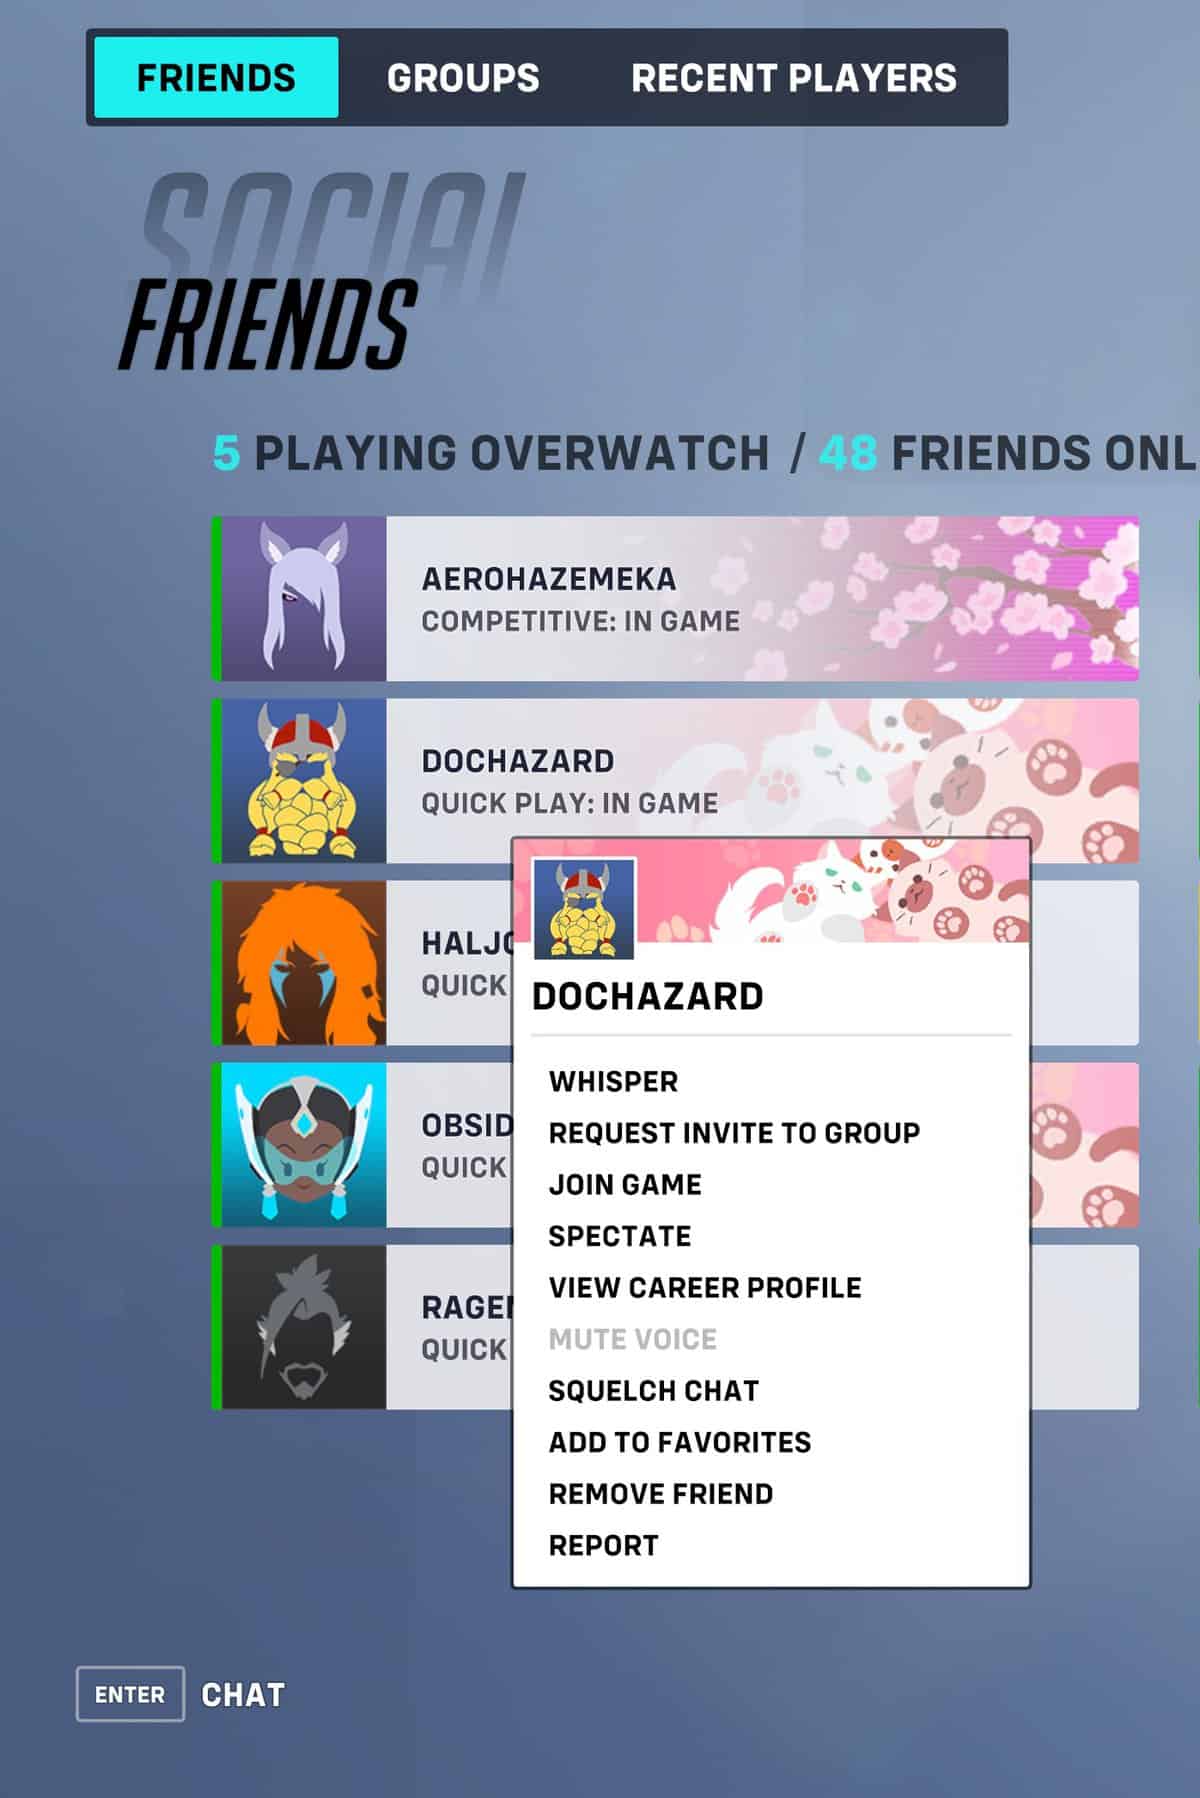 How to play Overwatch 2 with a group